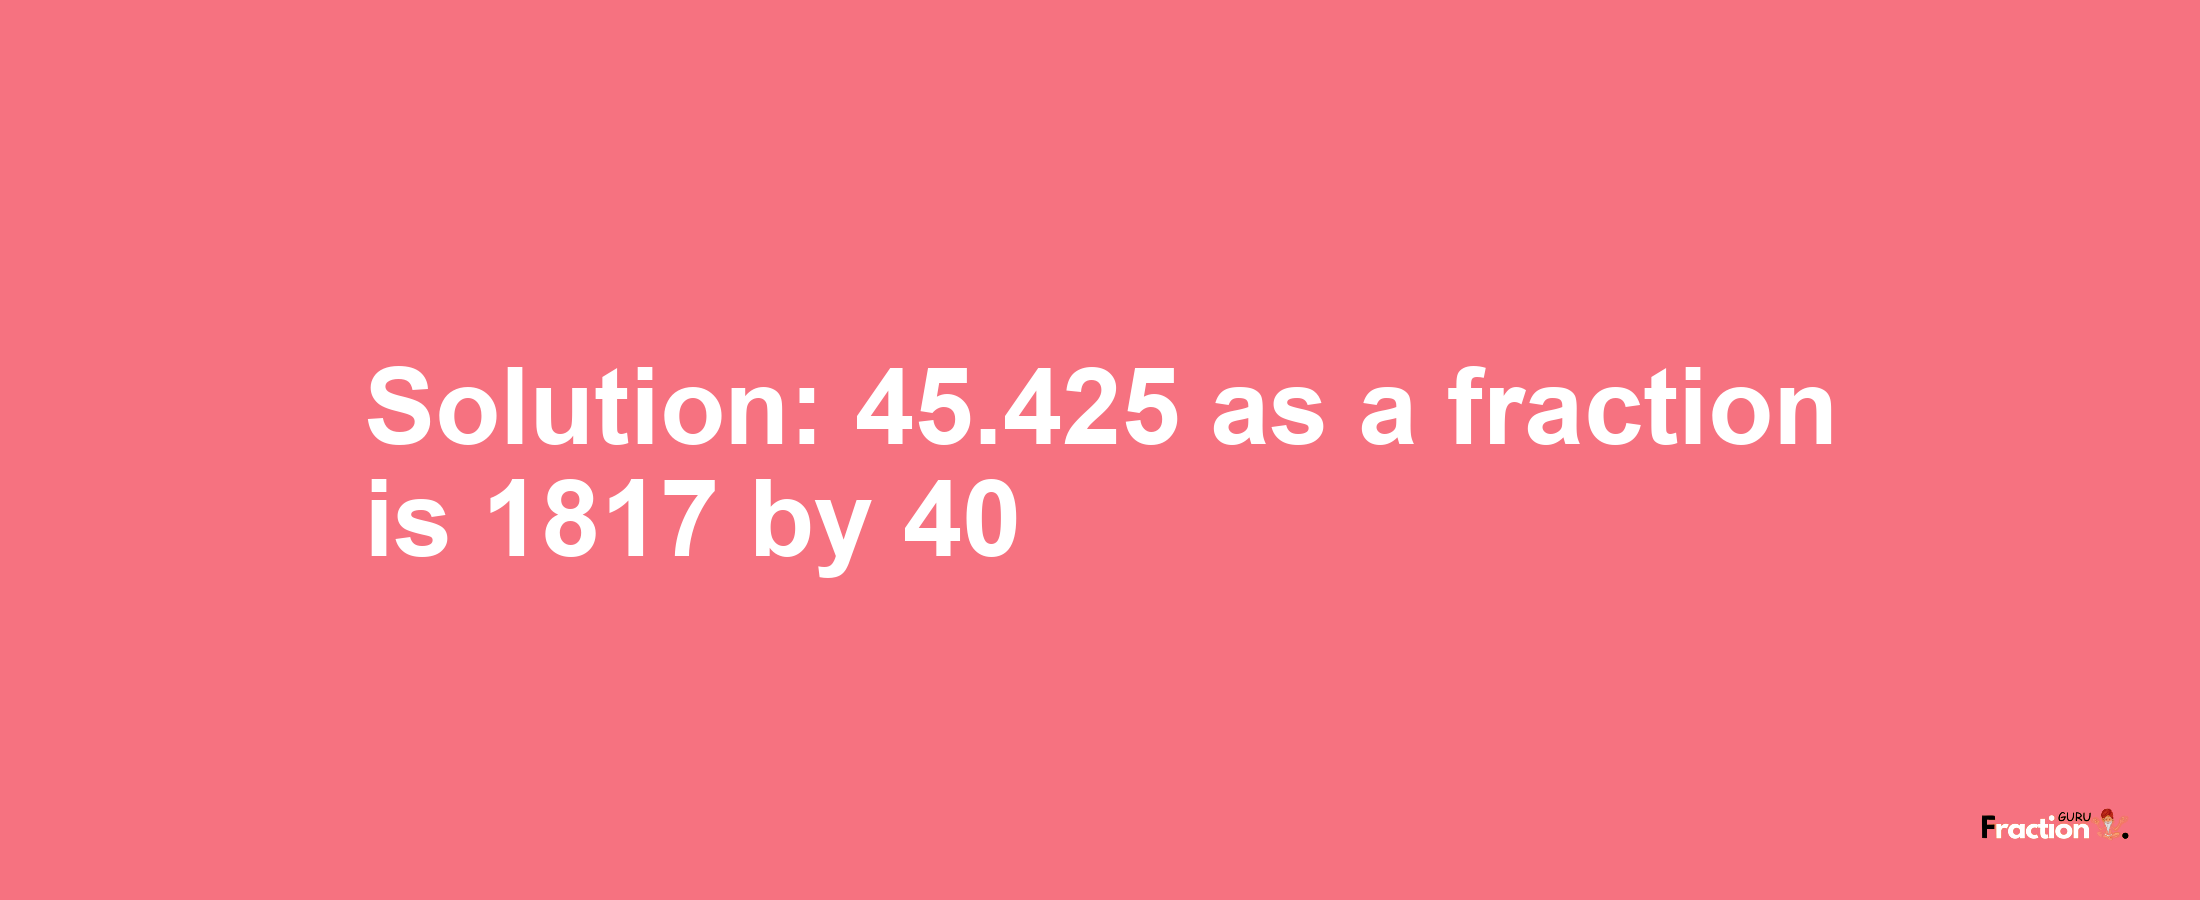 Solution:45.425 as a fraction is 1817/40